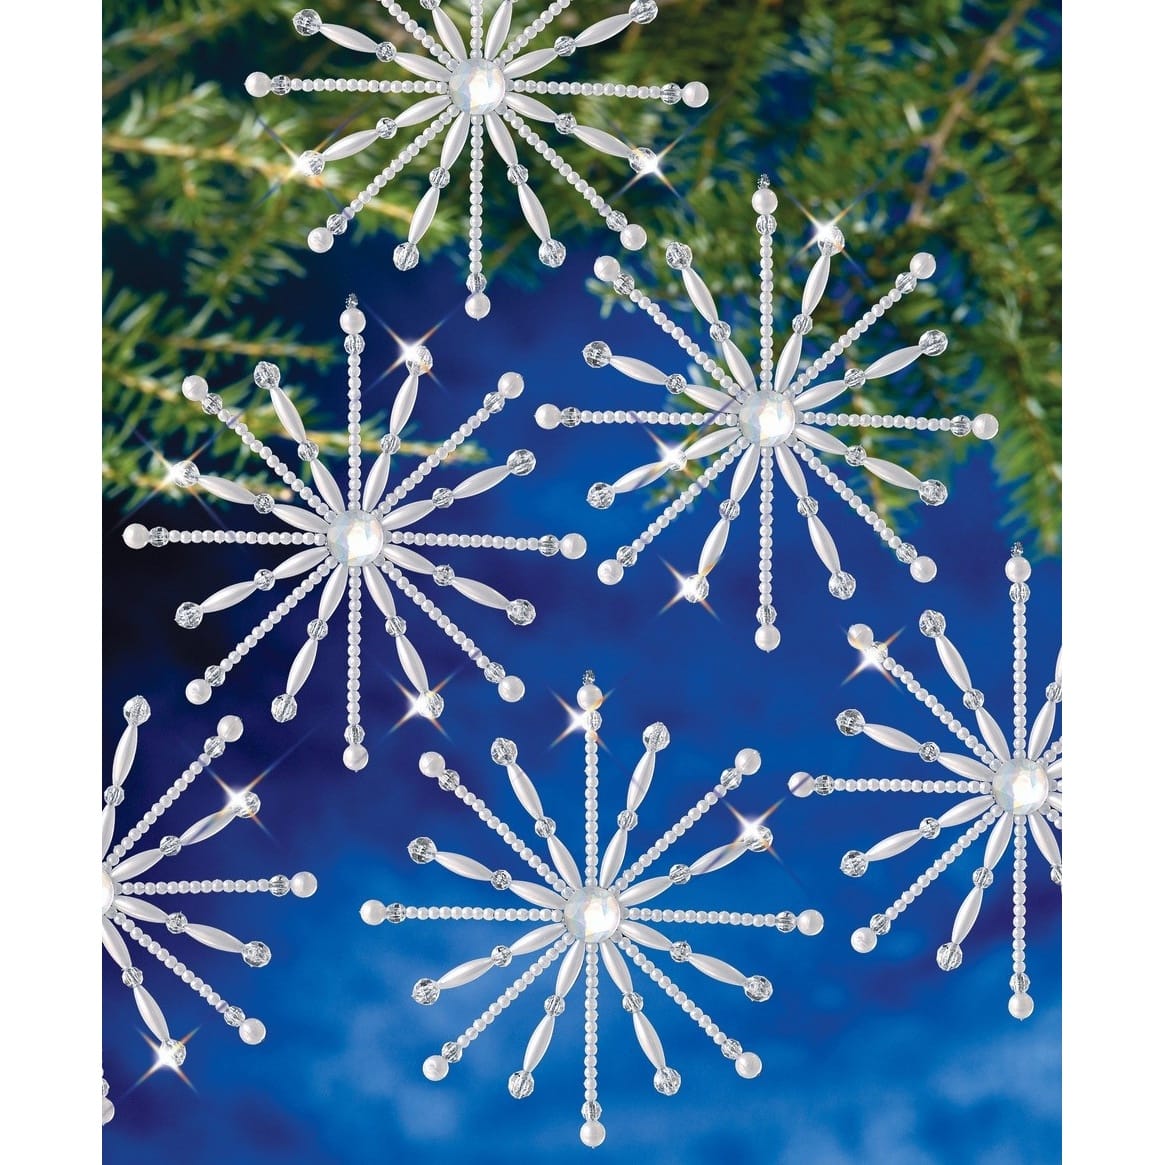 Essentials By Leisure Arts Clear Acrylic Ornaments 3 Assorted Holiday  10pc, Laser cut ornament blanks for decorating with vinyl, paint, stickers  and more